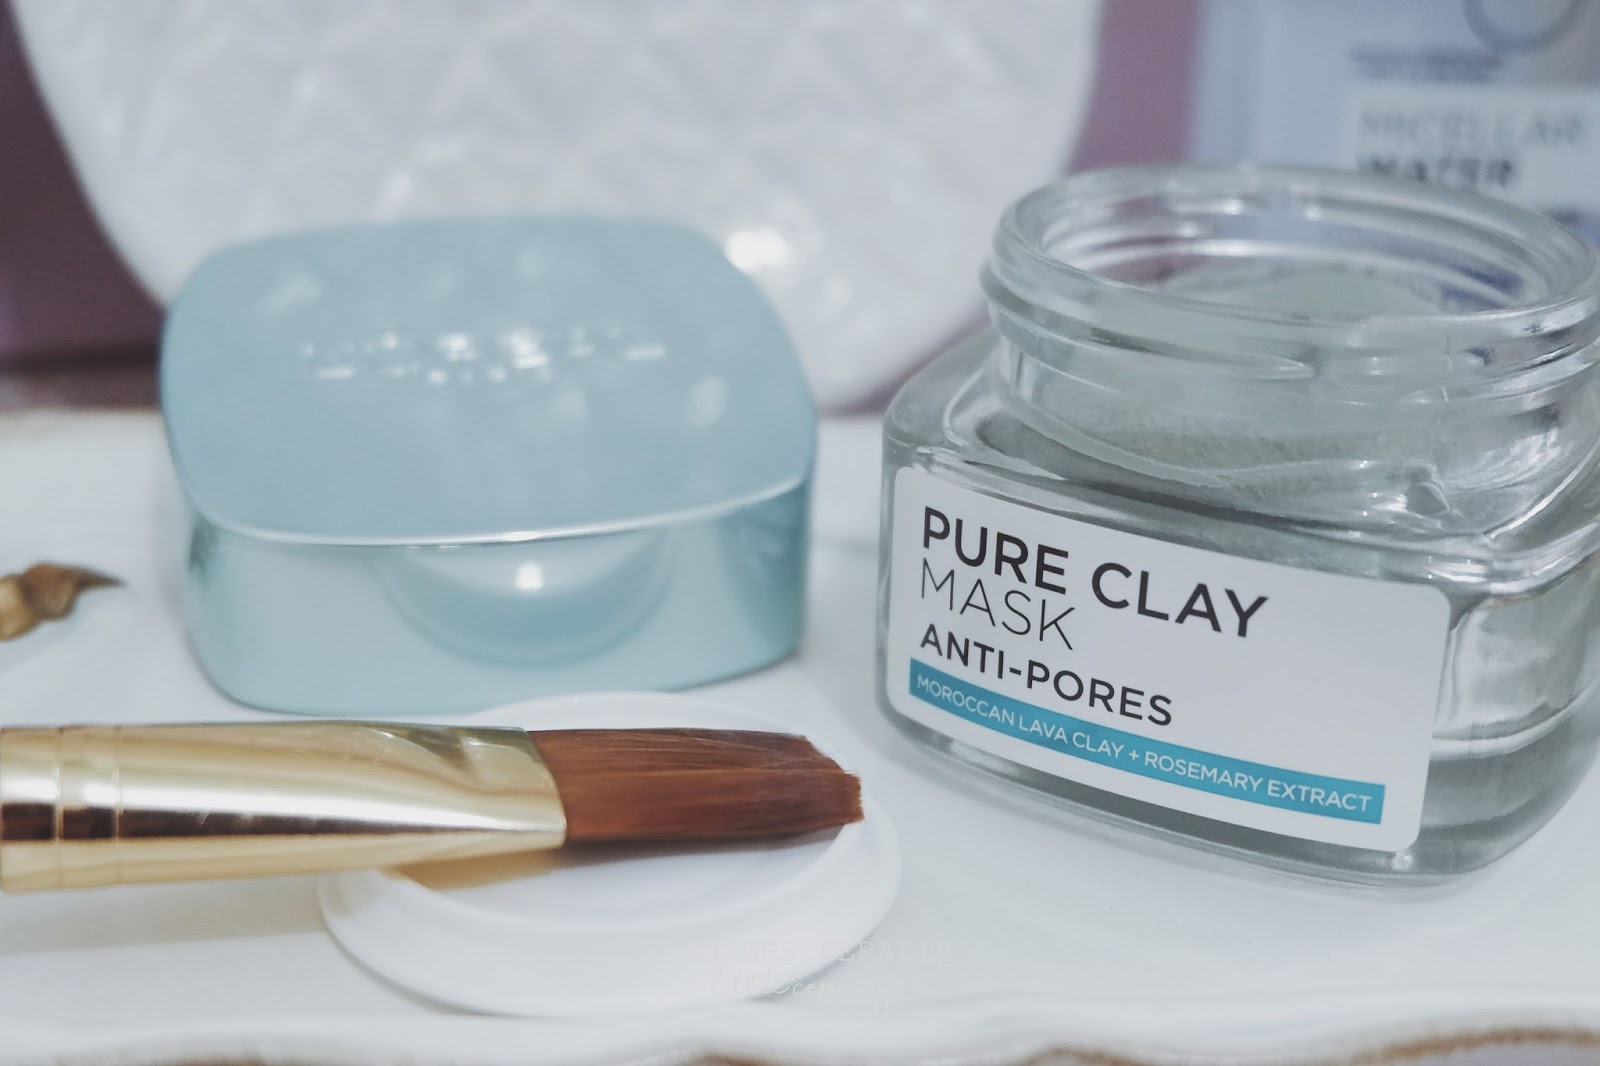 L'OREAL PURE CLAY MASK ANTI-PORES & HYDRATING REVIEW